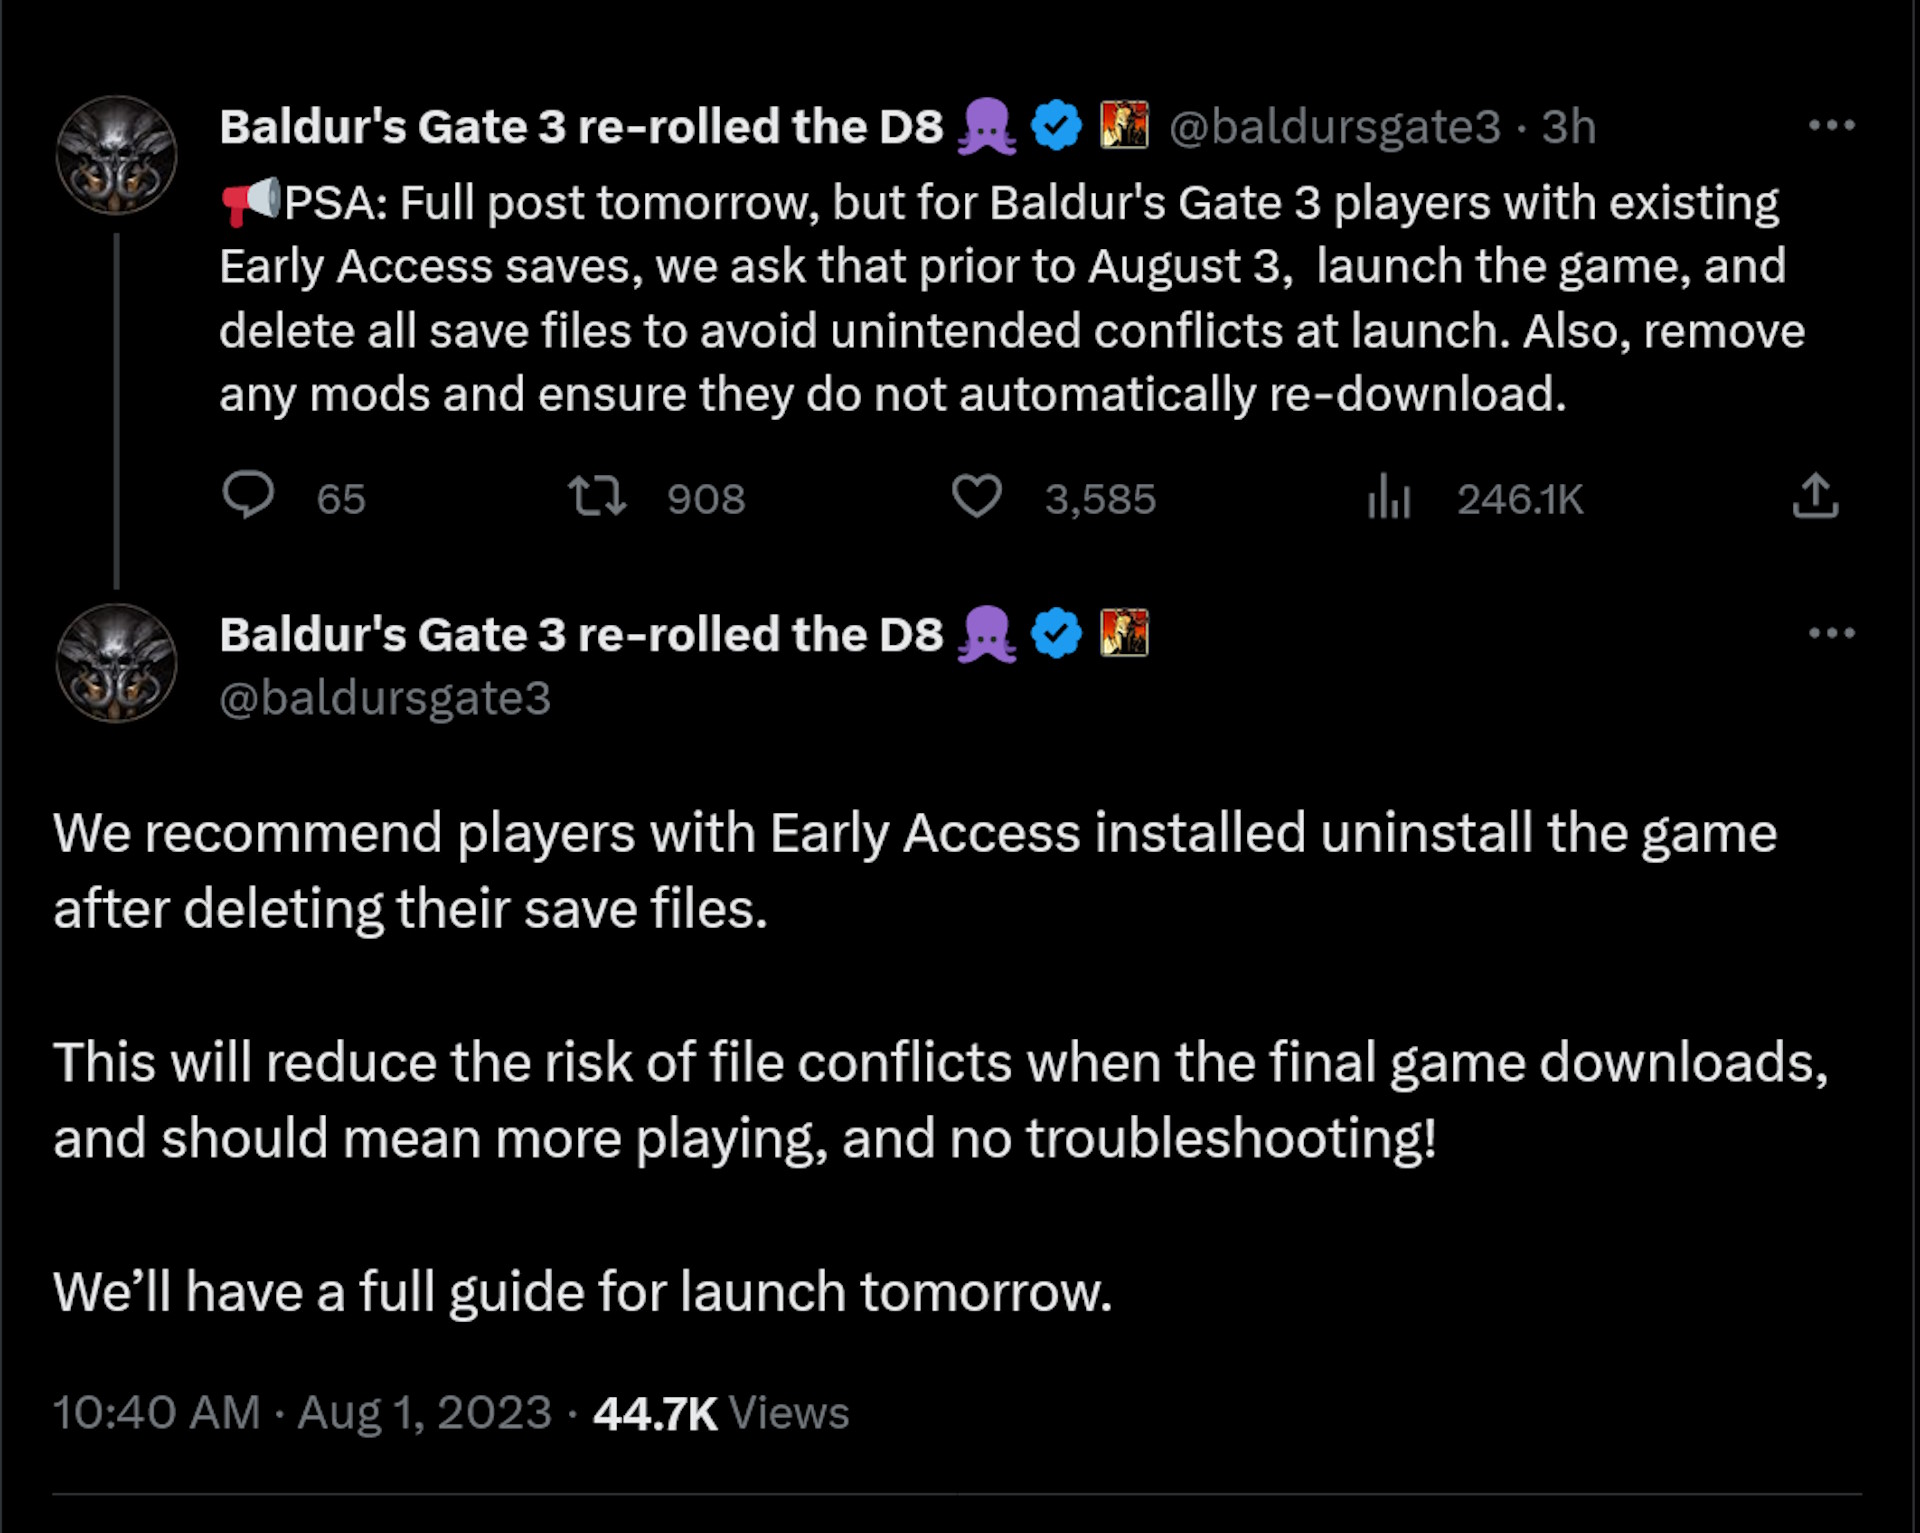 PSA: Full post tomorrow, but for Baldur's Gate 3 players with existing Early Access saves, we ask that prior to August 3,  launch the game, and delete all save files to avoid unintended conflicts at launch. Also, remove any mods and ensure they do not automatically re-download. We recommend players with Early Access installed uninstall the game after deleting their save files.   This will reduce the risk of file conflicts when the final game downloads, and should mean more playing, and no troubleshooting!   We’ll have a full guide for launch tomorrow.